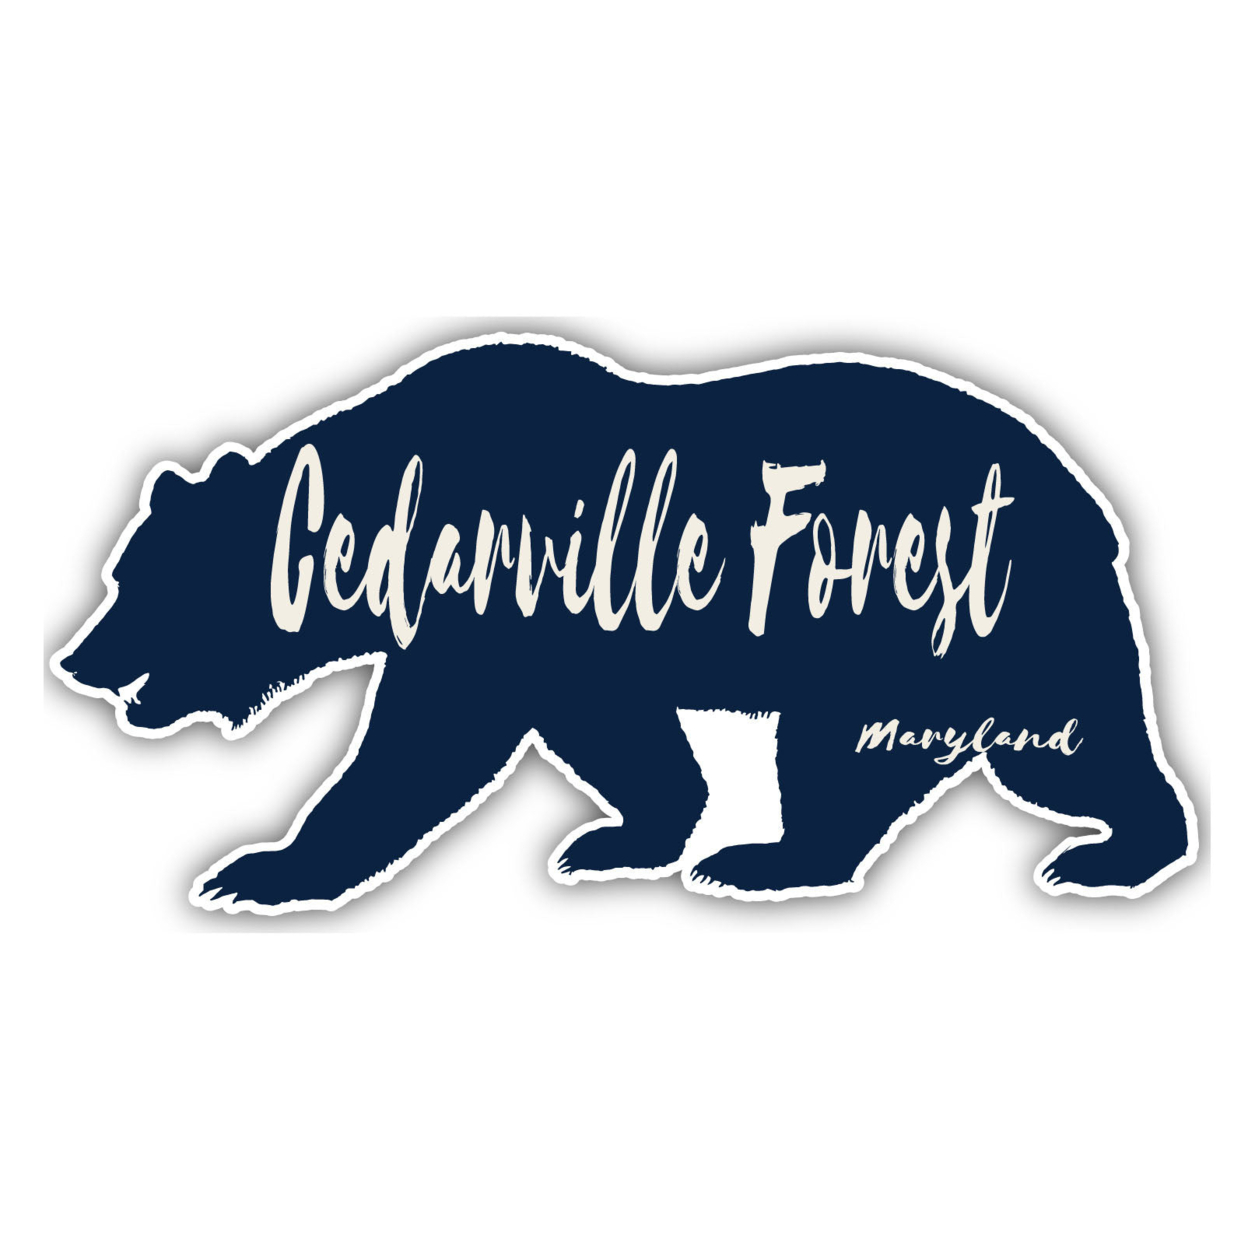 Cedarville Forest Maryland Souvenir Decorative Stickers (Choose Theme And Size) - Single Unit, 12-Inch, Bear